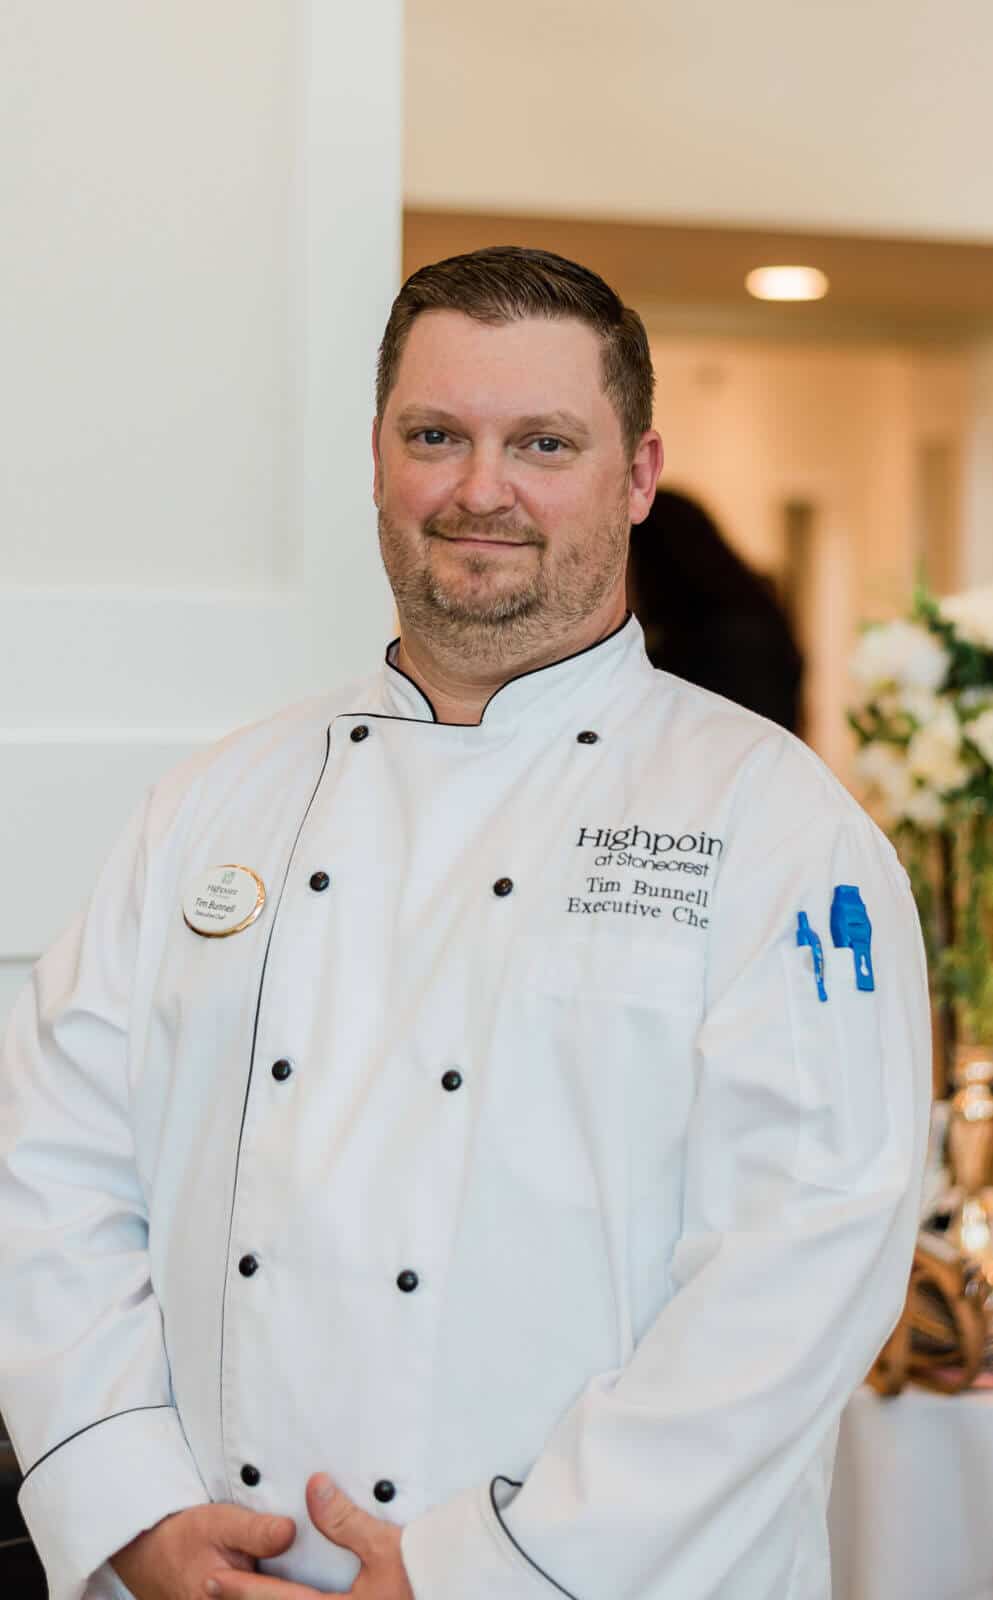 Executive Chef of Highpoint at Stonecrest